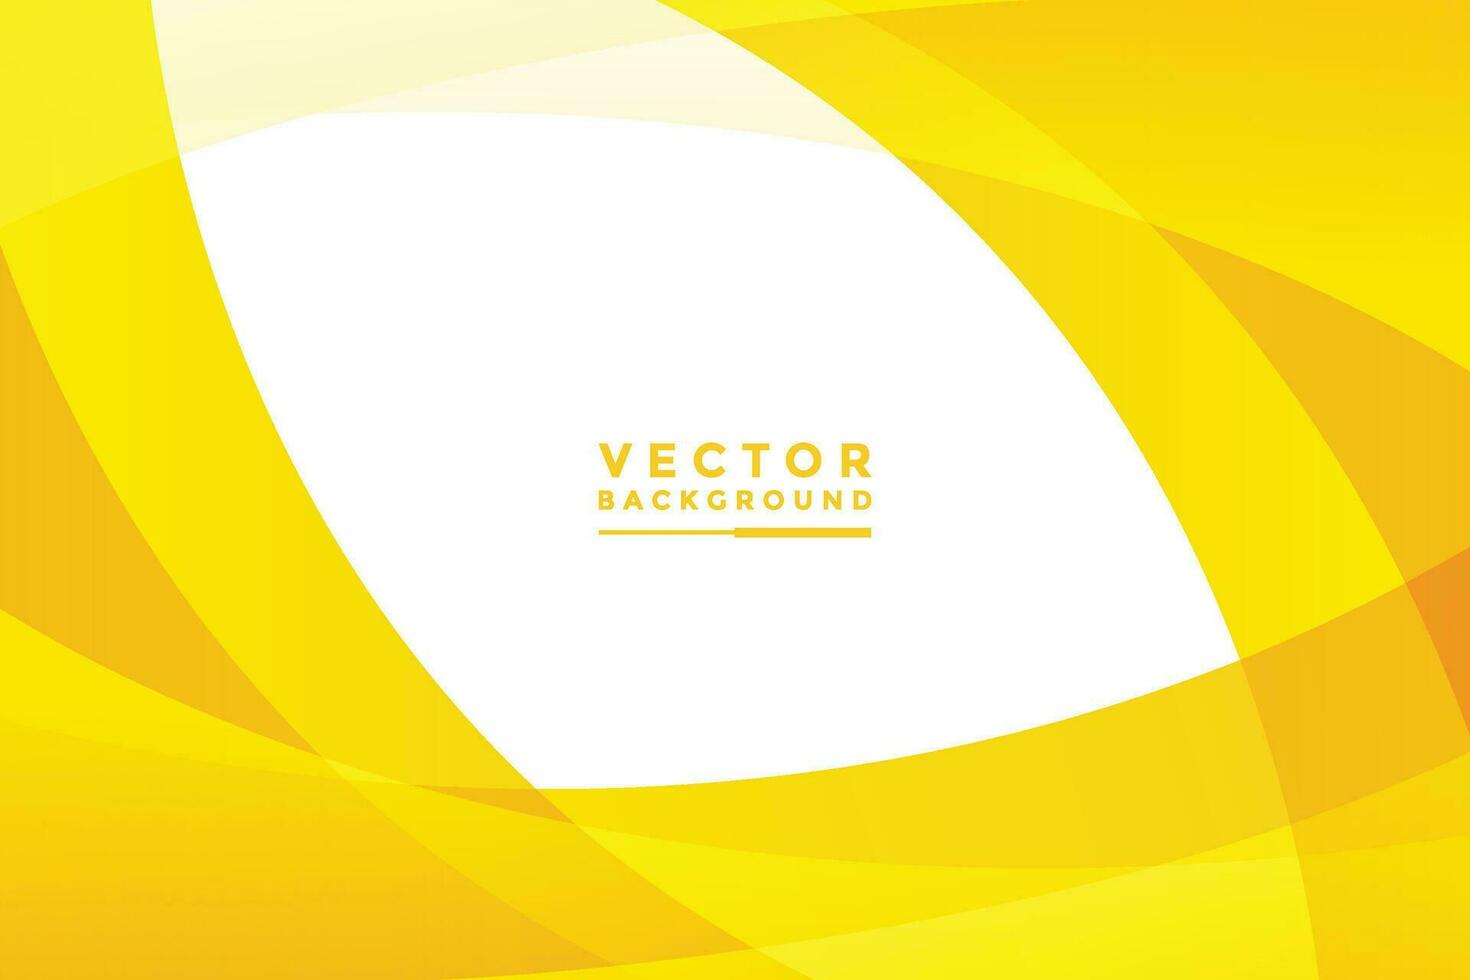 Yellow background vector illustration lighting effect graphic for text and message board design infographic.